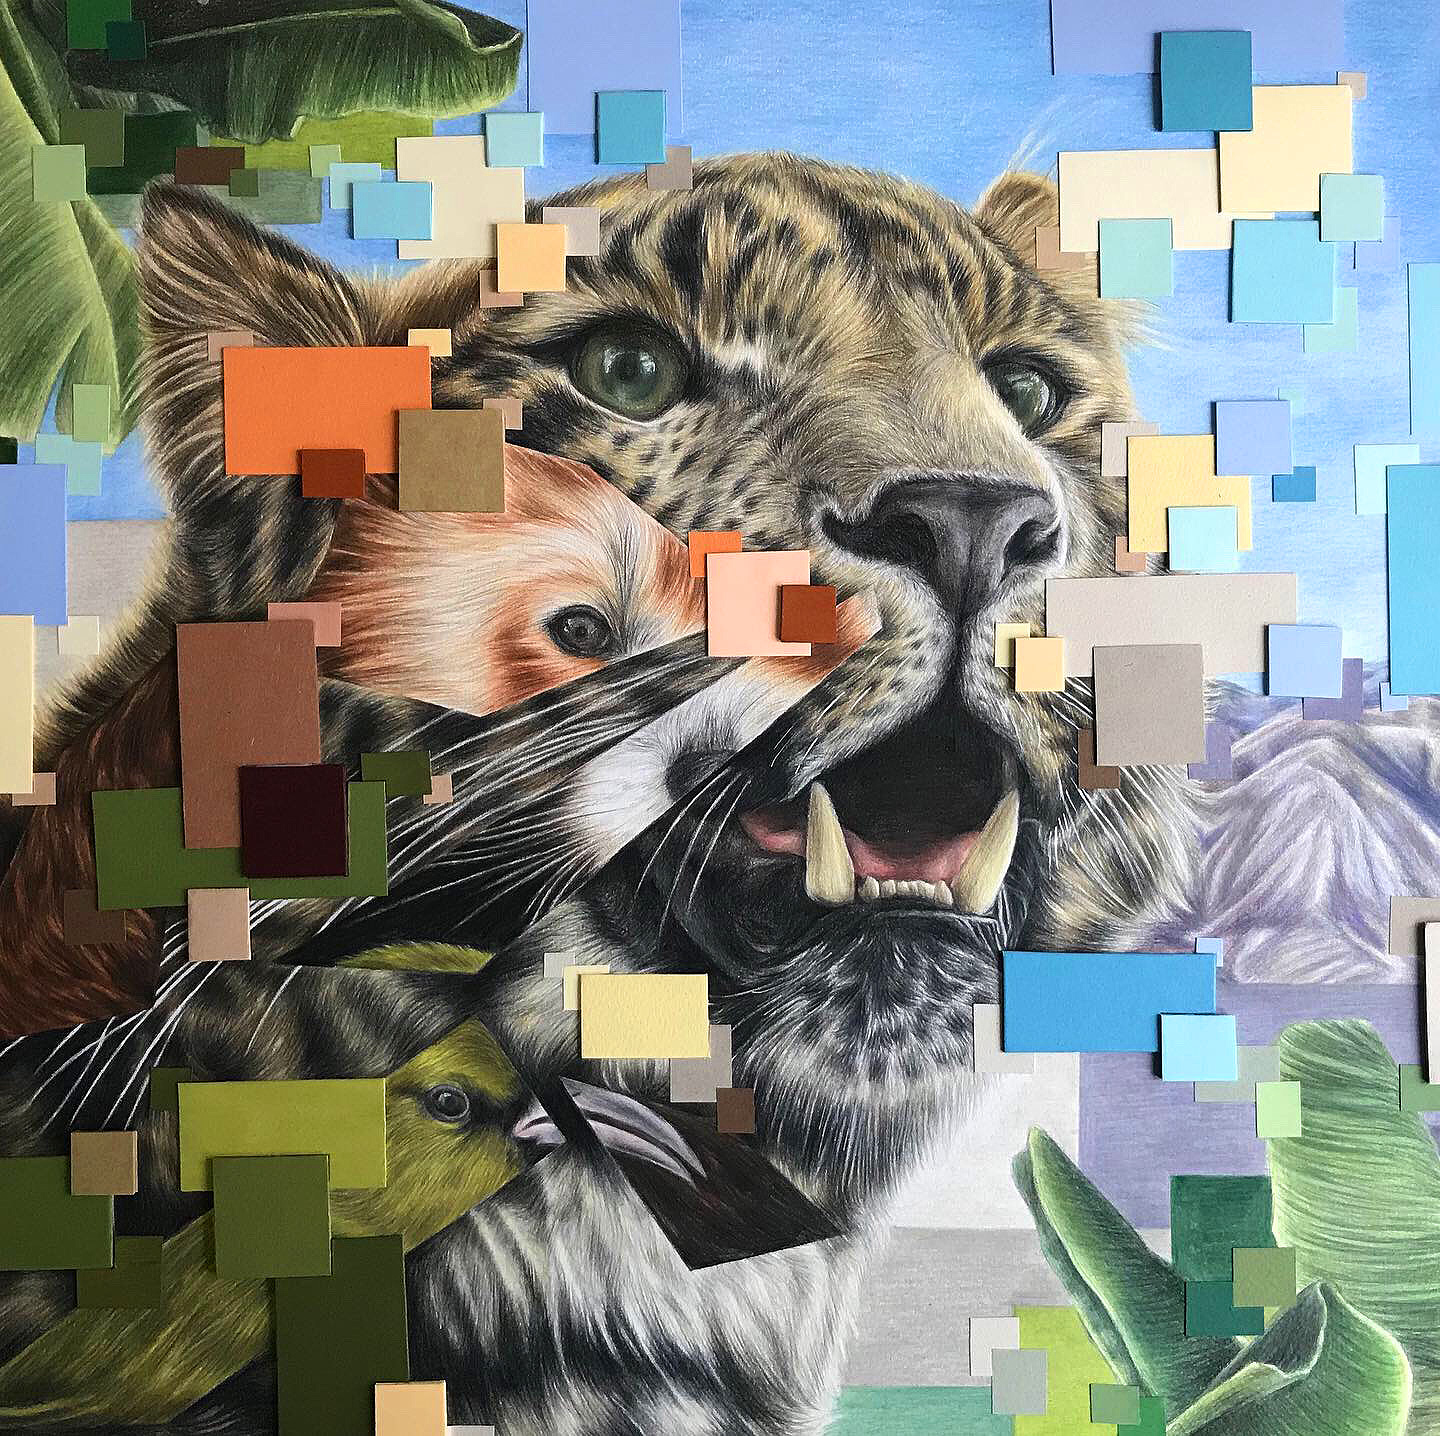 Evolution final piece. Coloured pencil drawing of leopard face with red panda, tropical Amakihi bird and layered 3D pixels collaged into face.